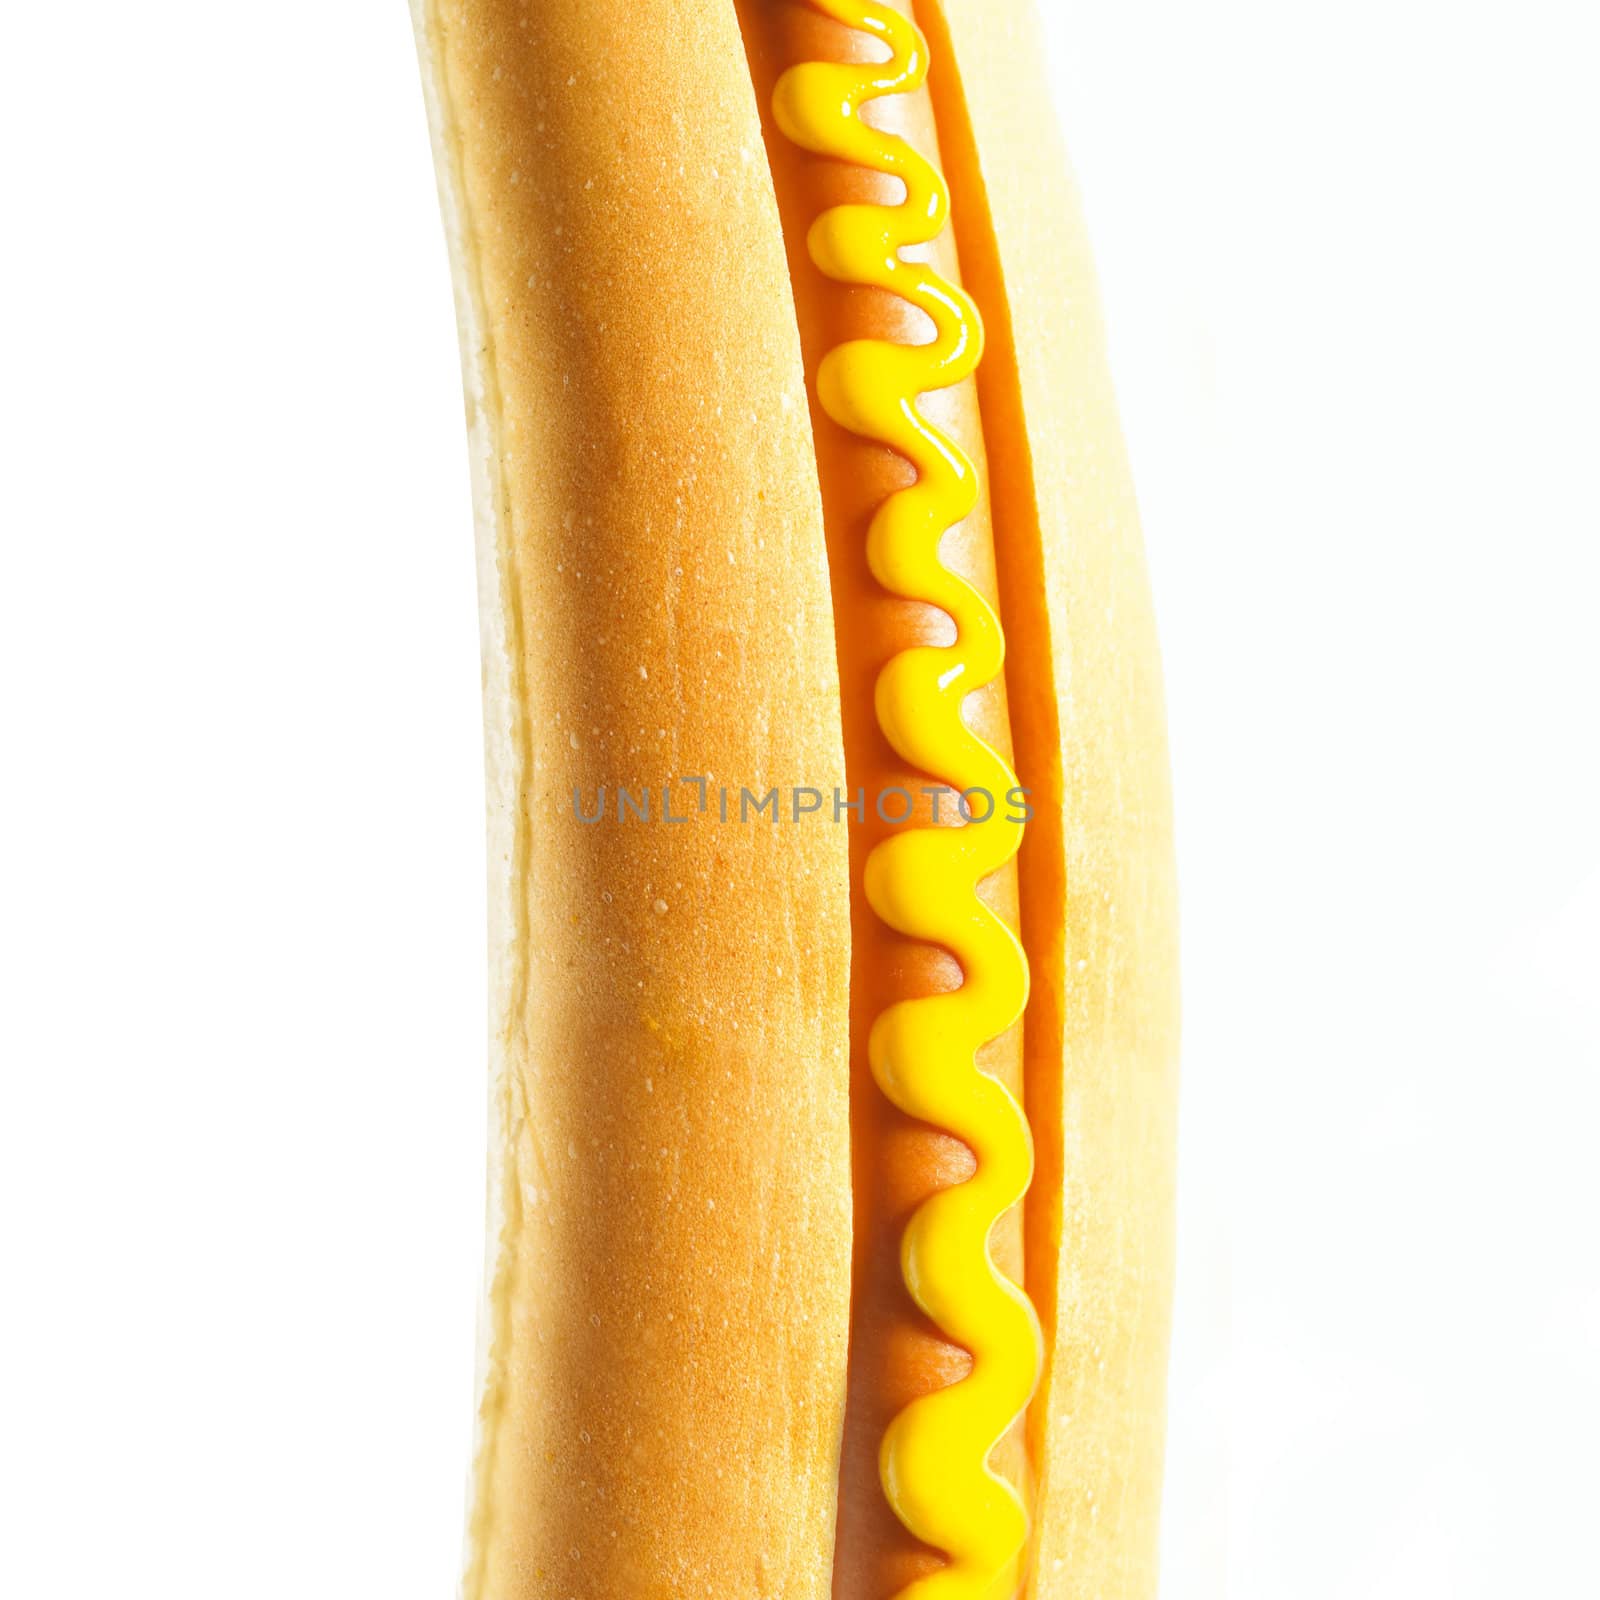 hot dog on white background by ozaiachin